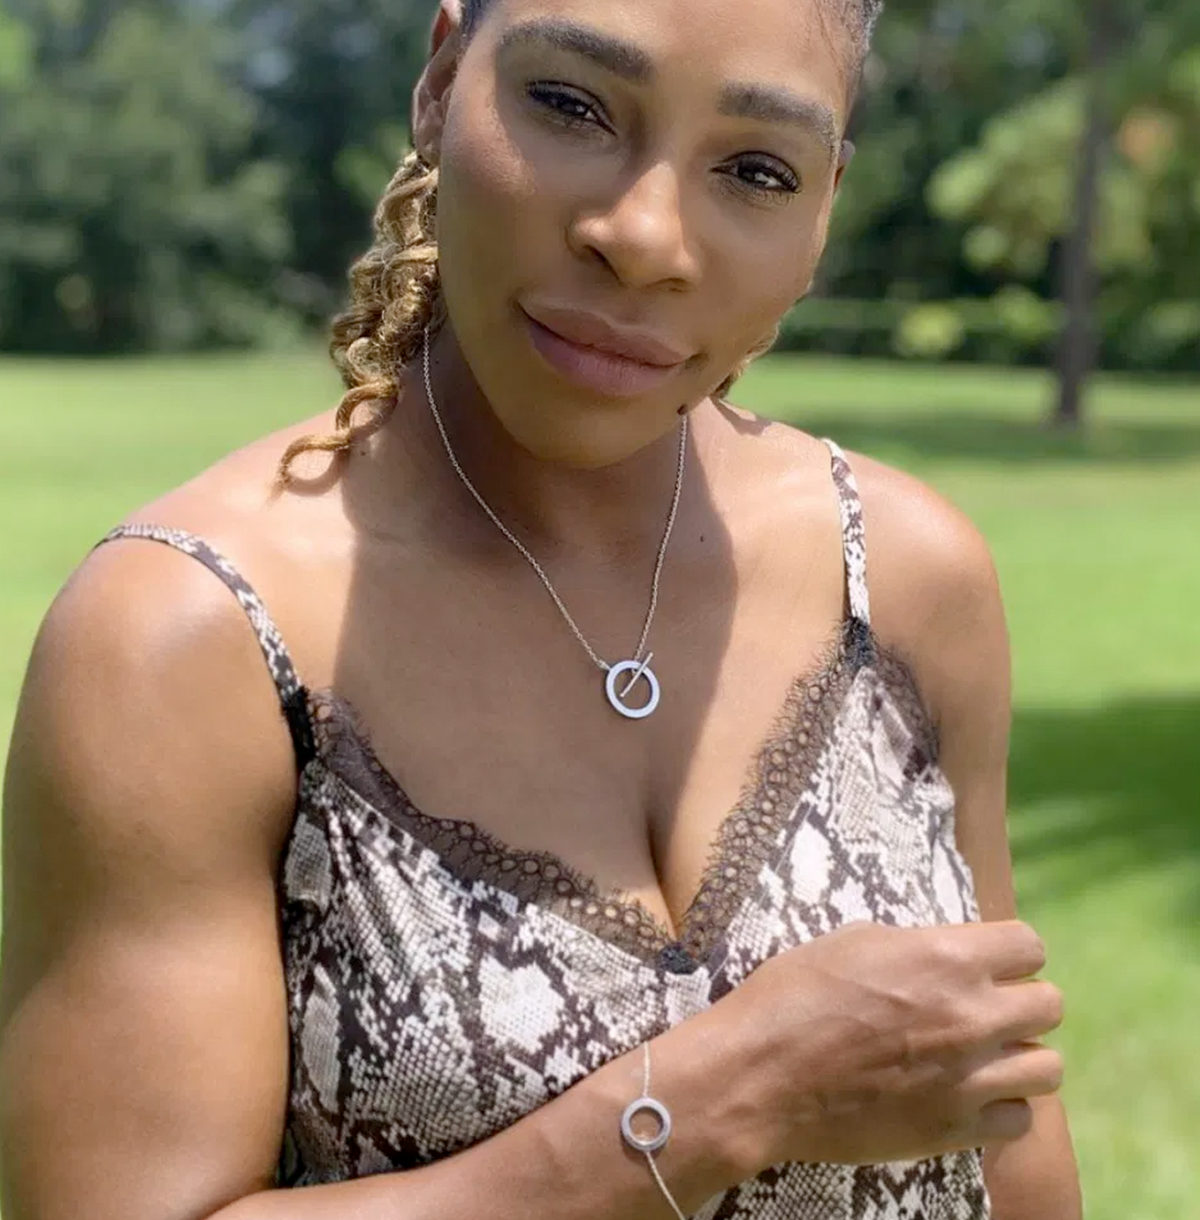 Editors note: Serena Williams Donates Proceeds from Unstoppable Jewelry Collection to Relief Fund for Black-Owned Small Businesses